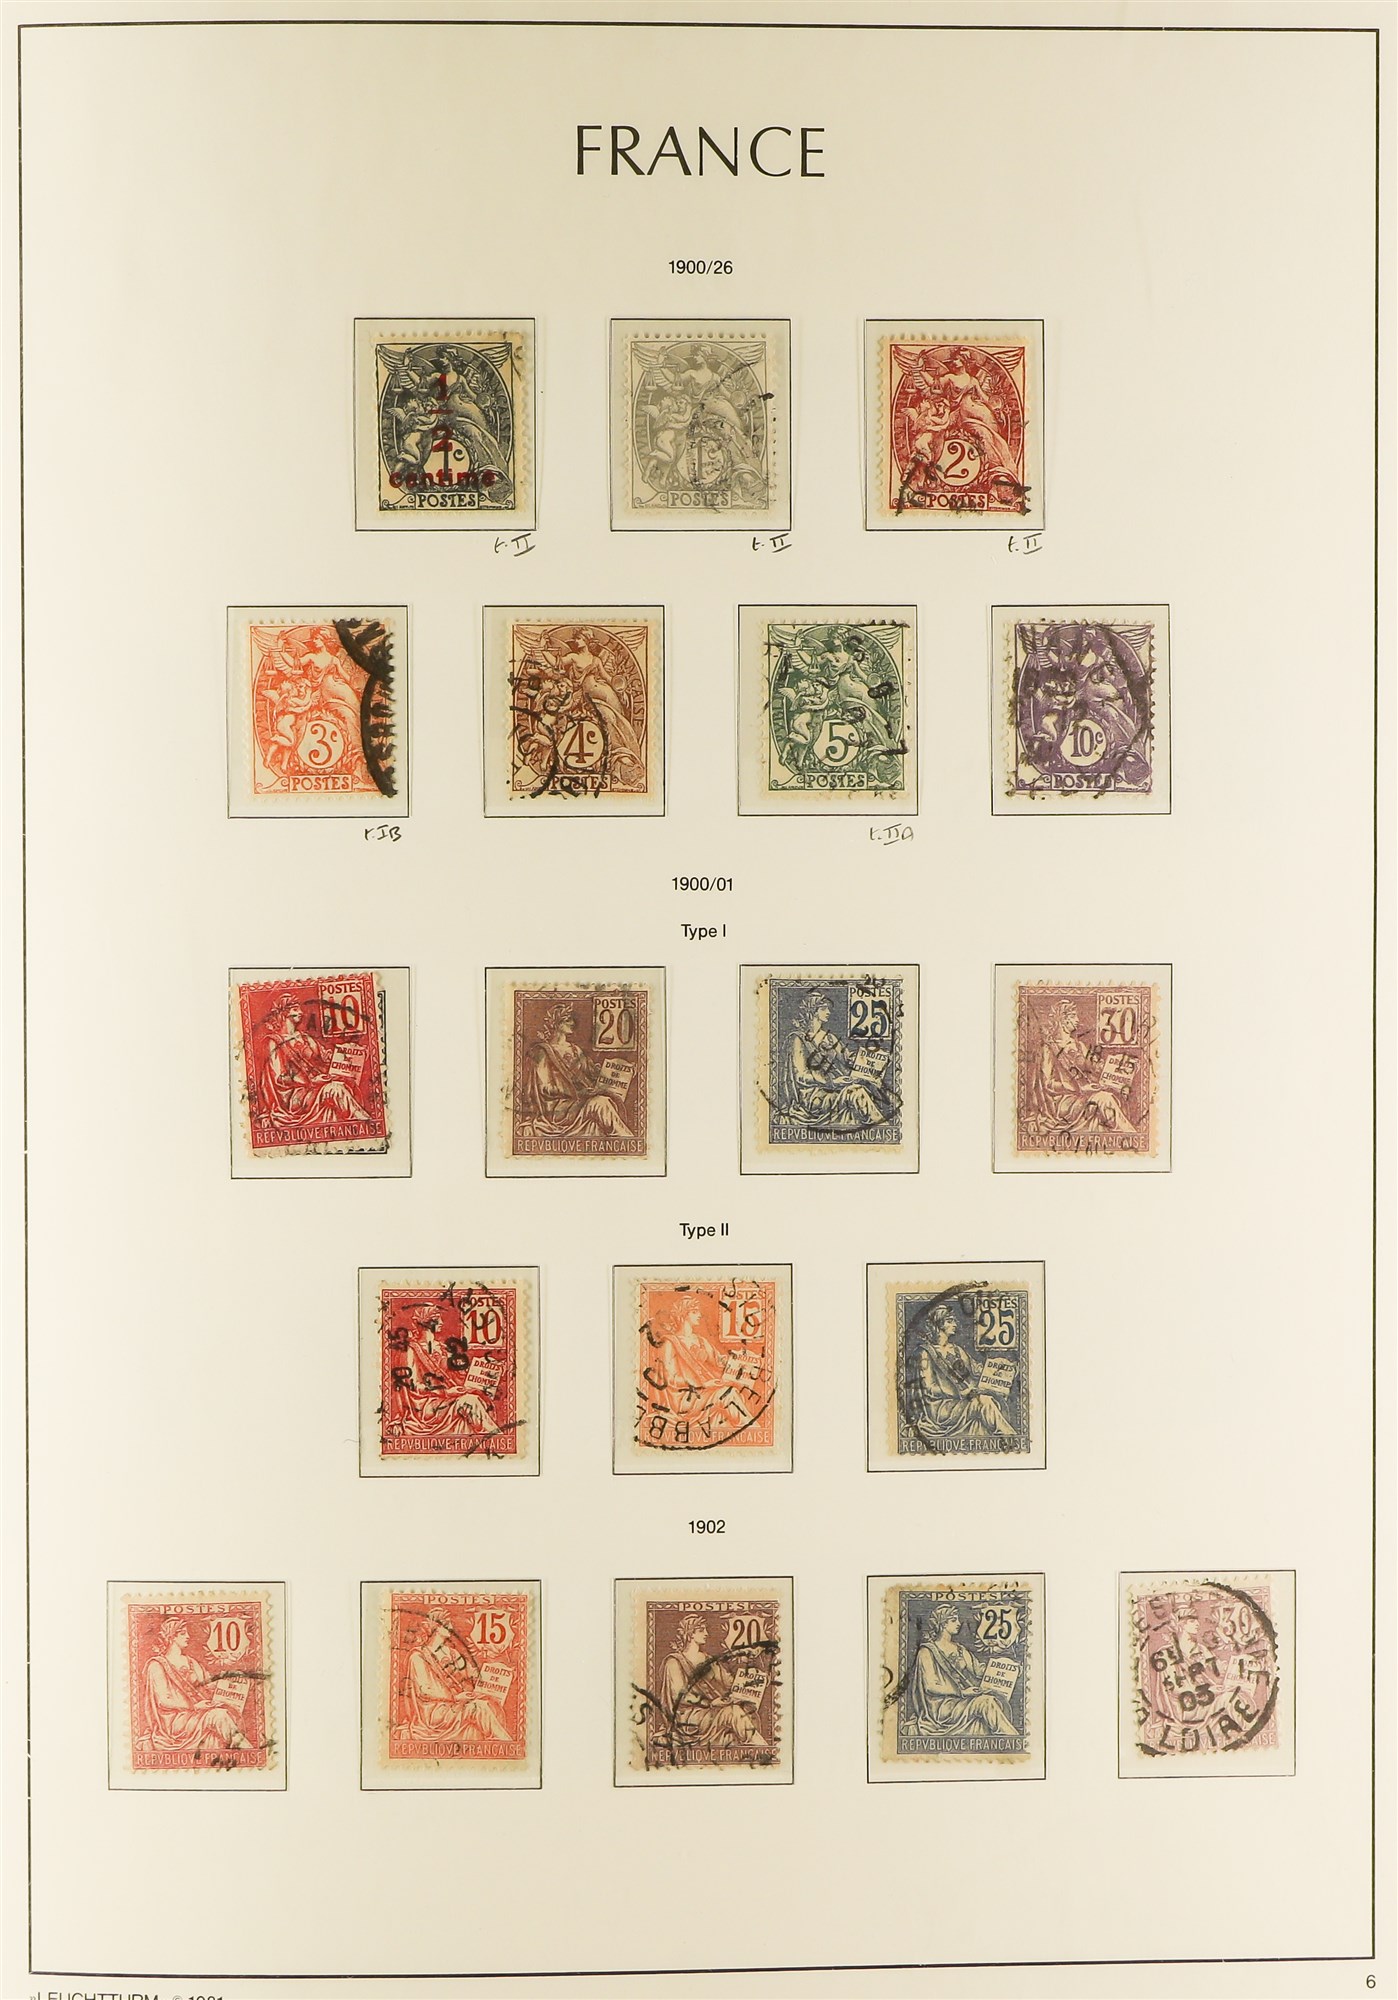 FRANCE 1900 - 1949 USED COLLECTION in a hingeless Lighthouse France album, near-complete for the